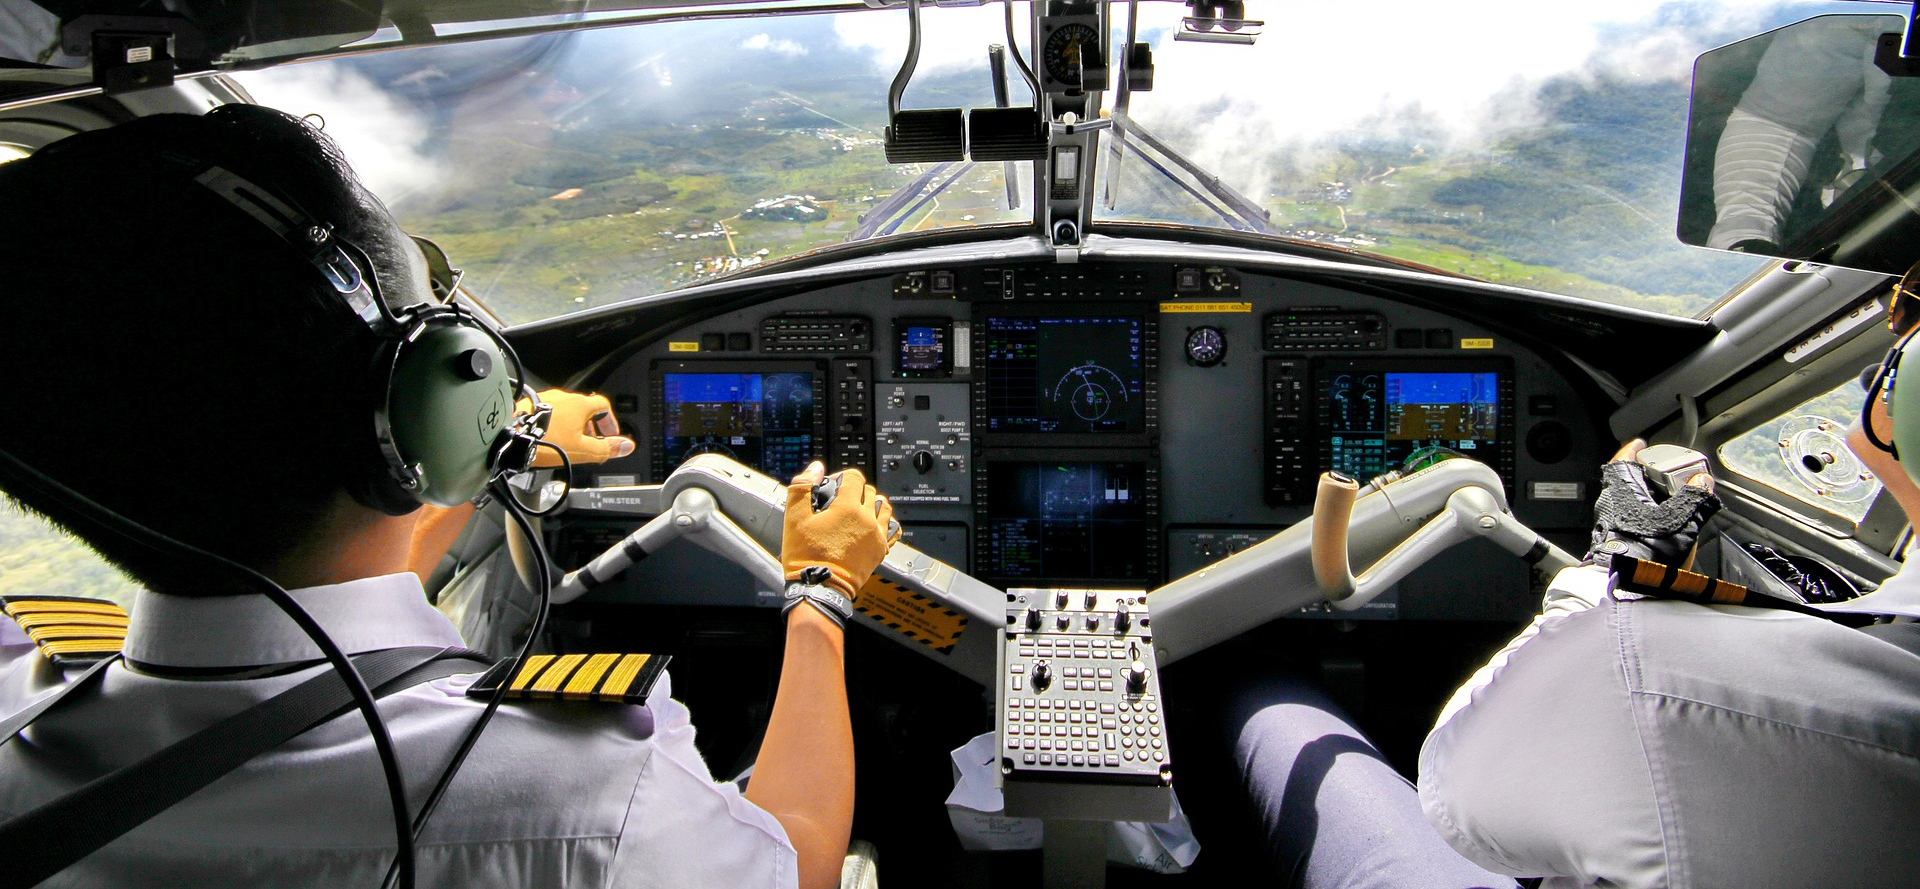 Two pilots fly the plane.